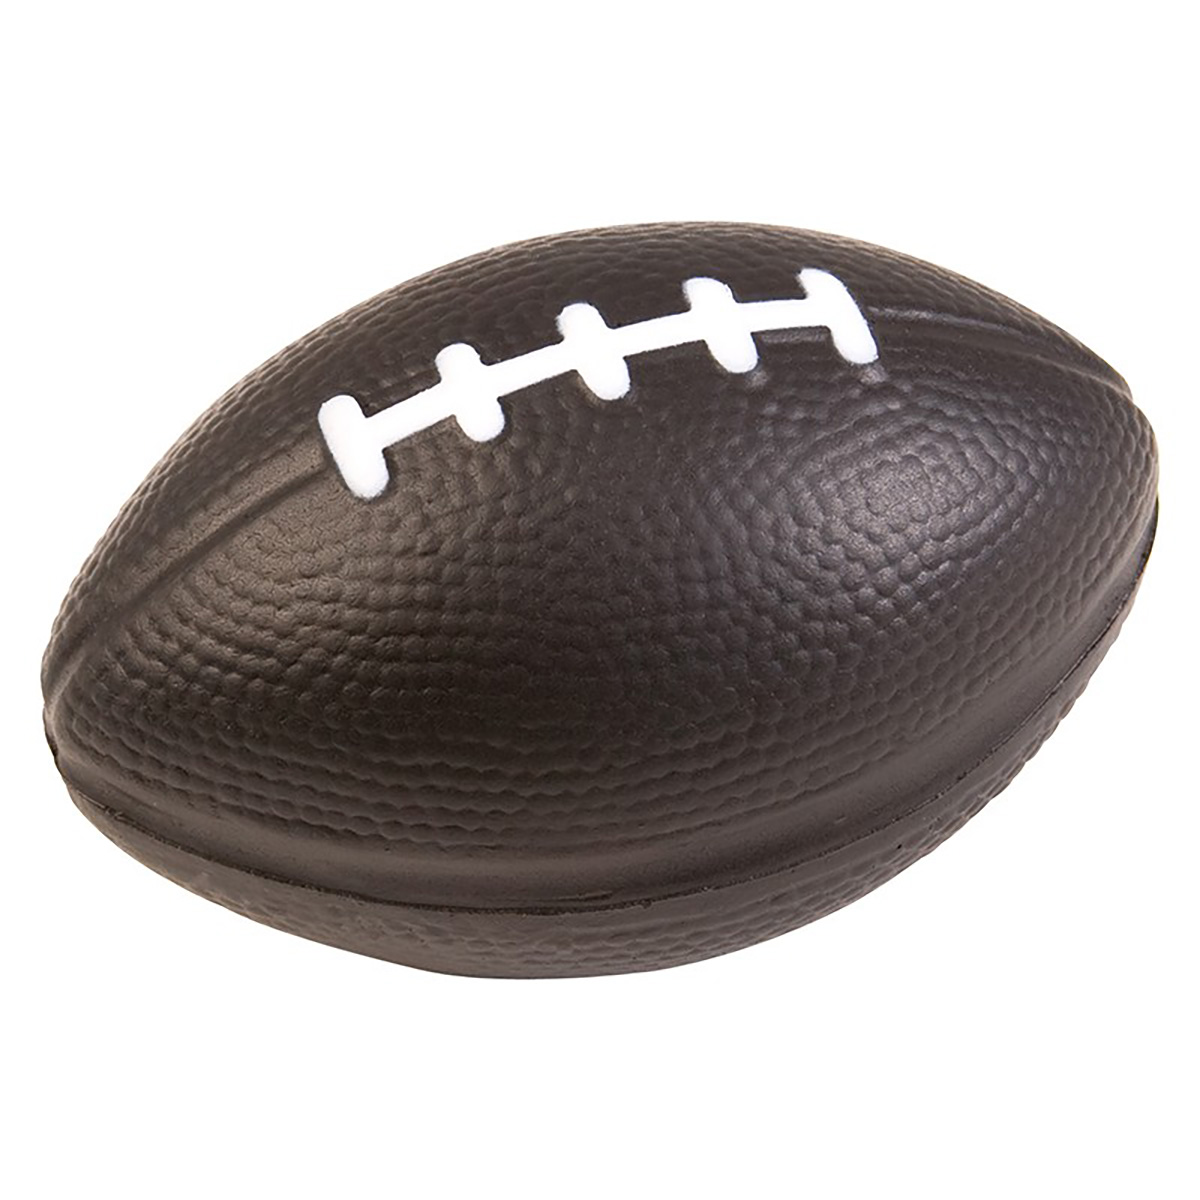 Black 3" Football Stress Reliever (Small) 